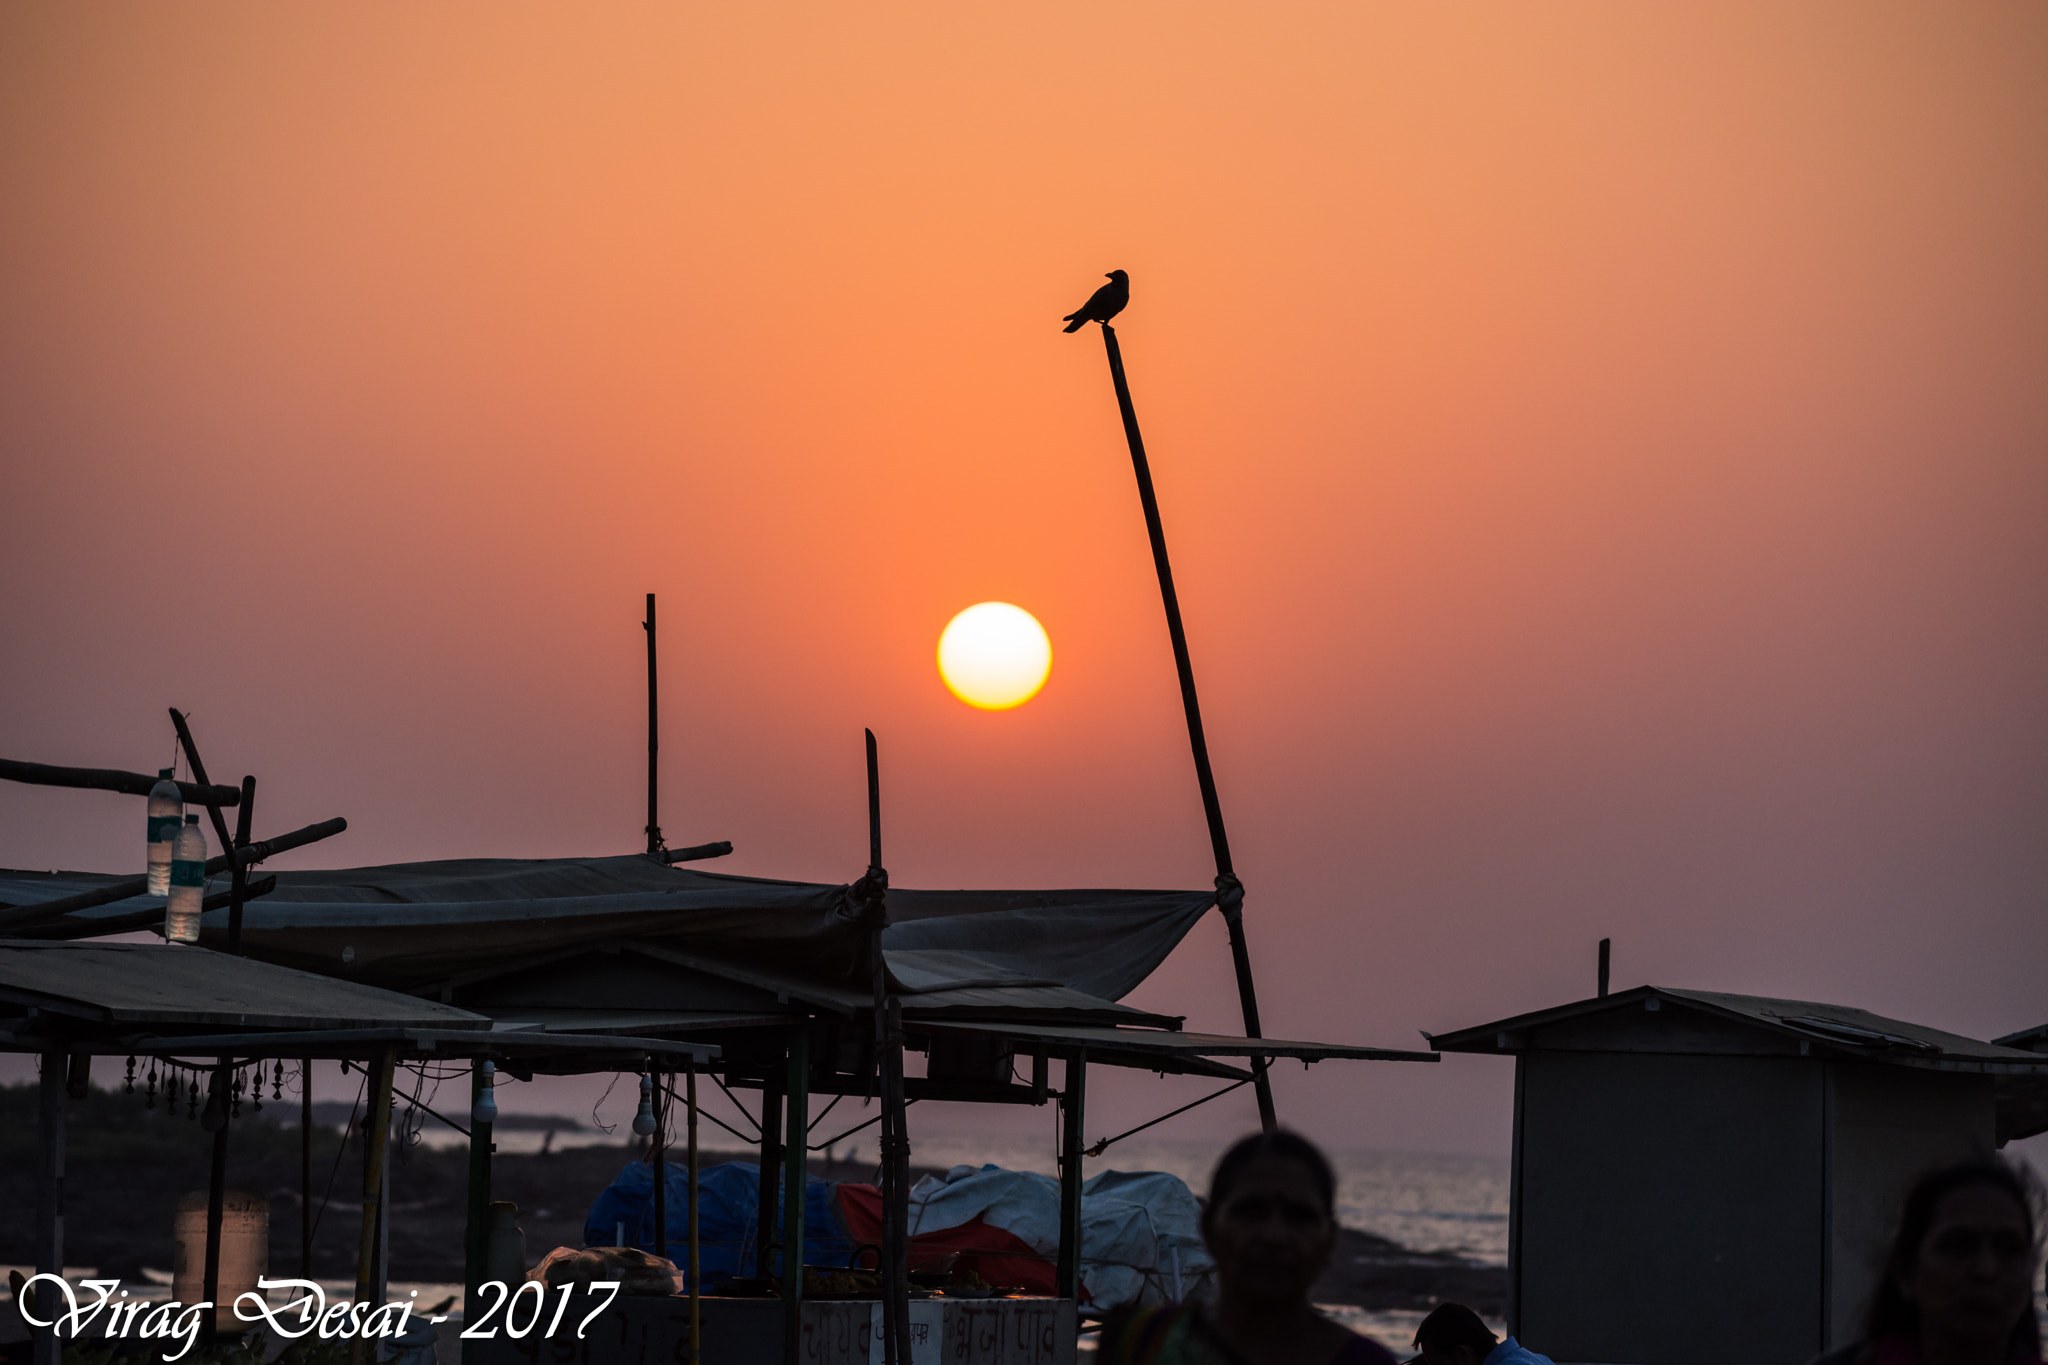 Nikon D5200 + Sigma 70-300mm F4-5.6 DG OS sample photo. A sunset and silhouette photography